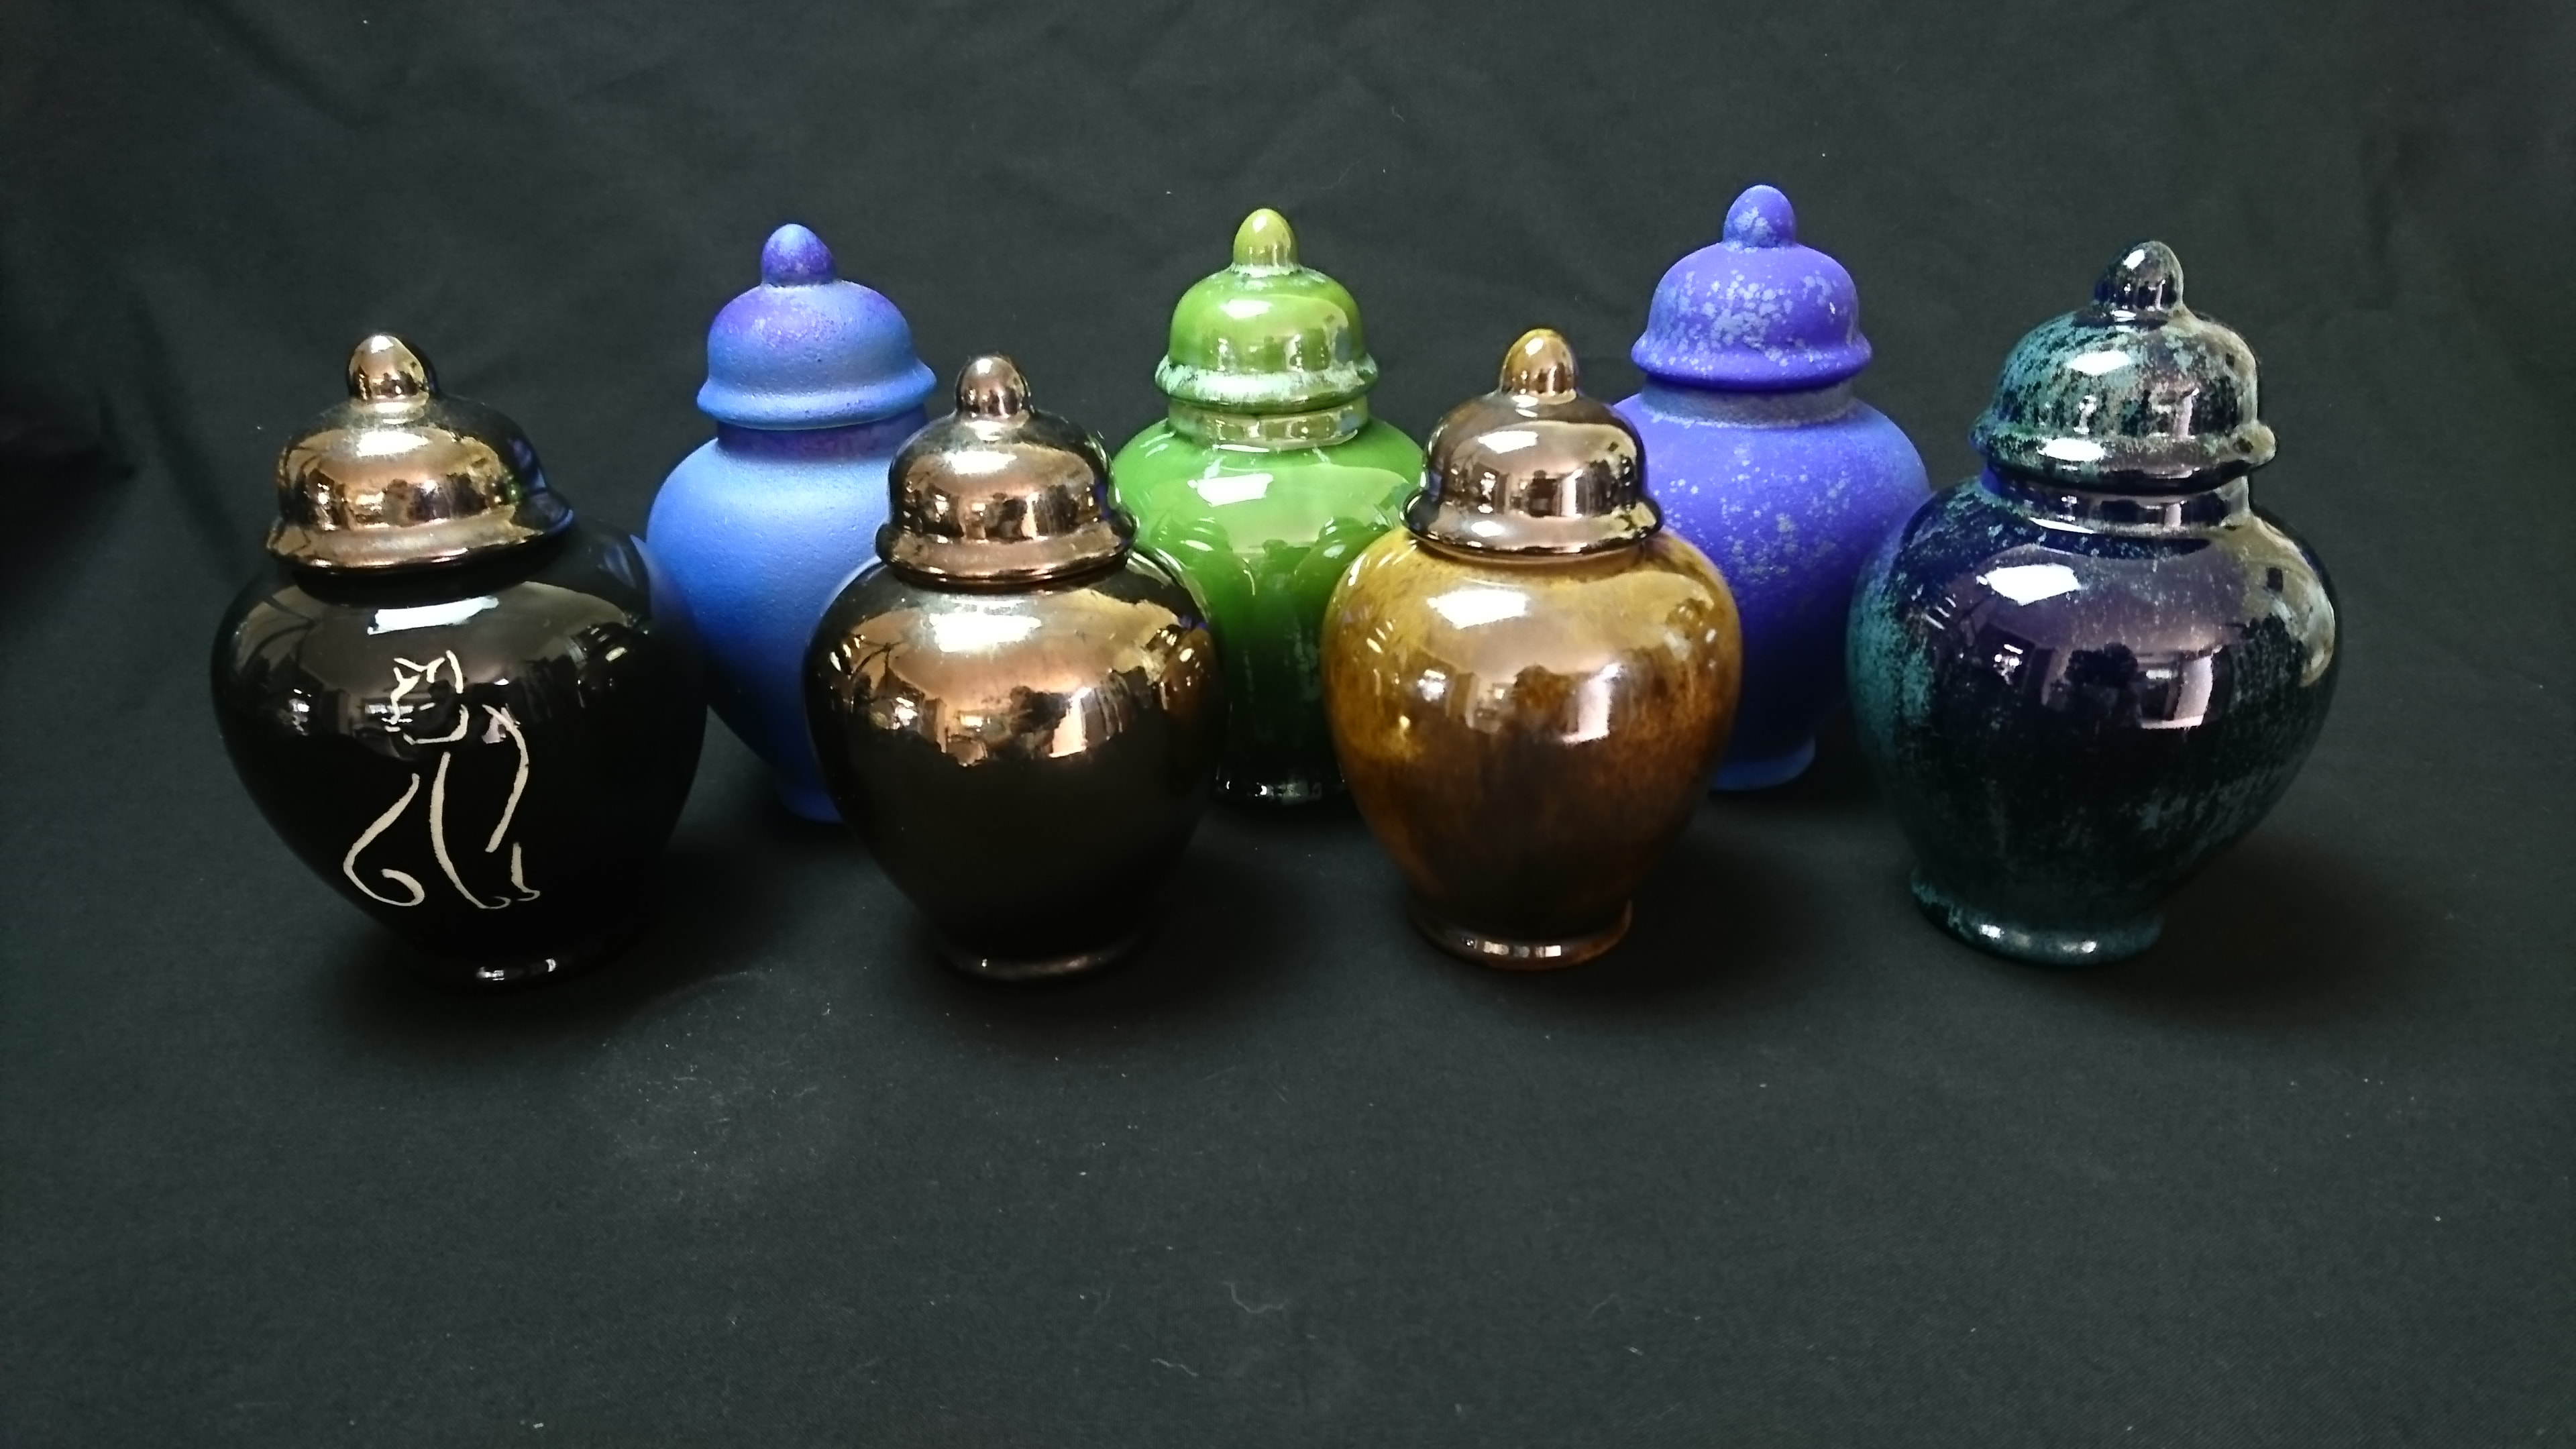 urns for adult ashes